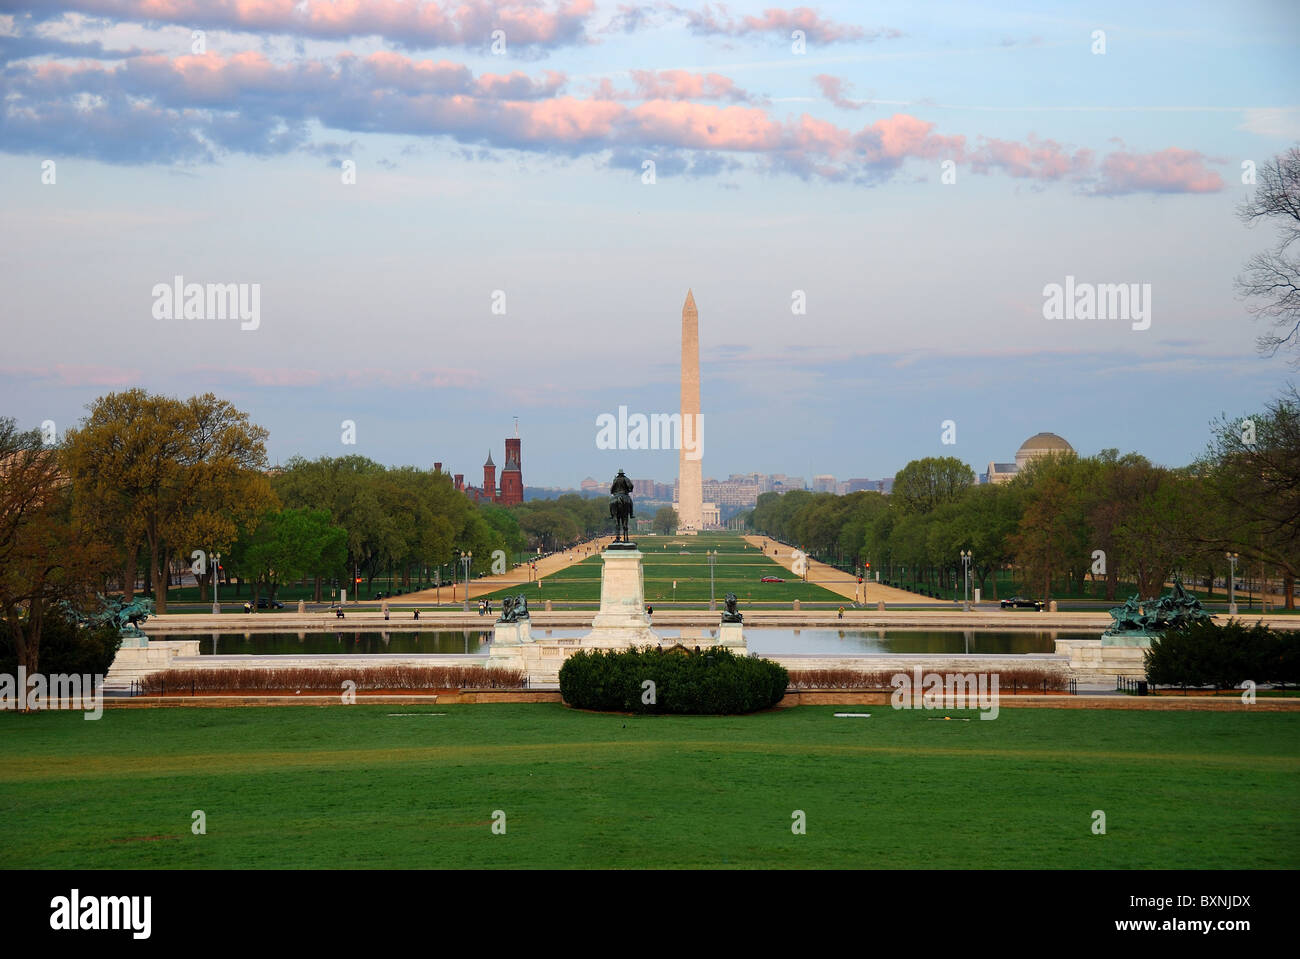 Washington DC national mall in the morning with colorful cloud and landmarks Washington monument. Stock Photo